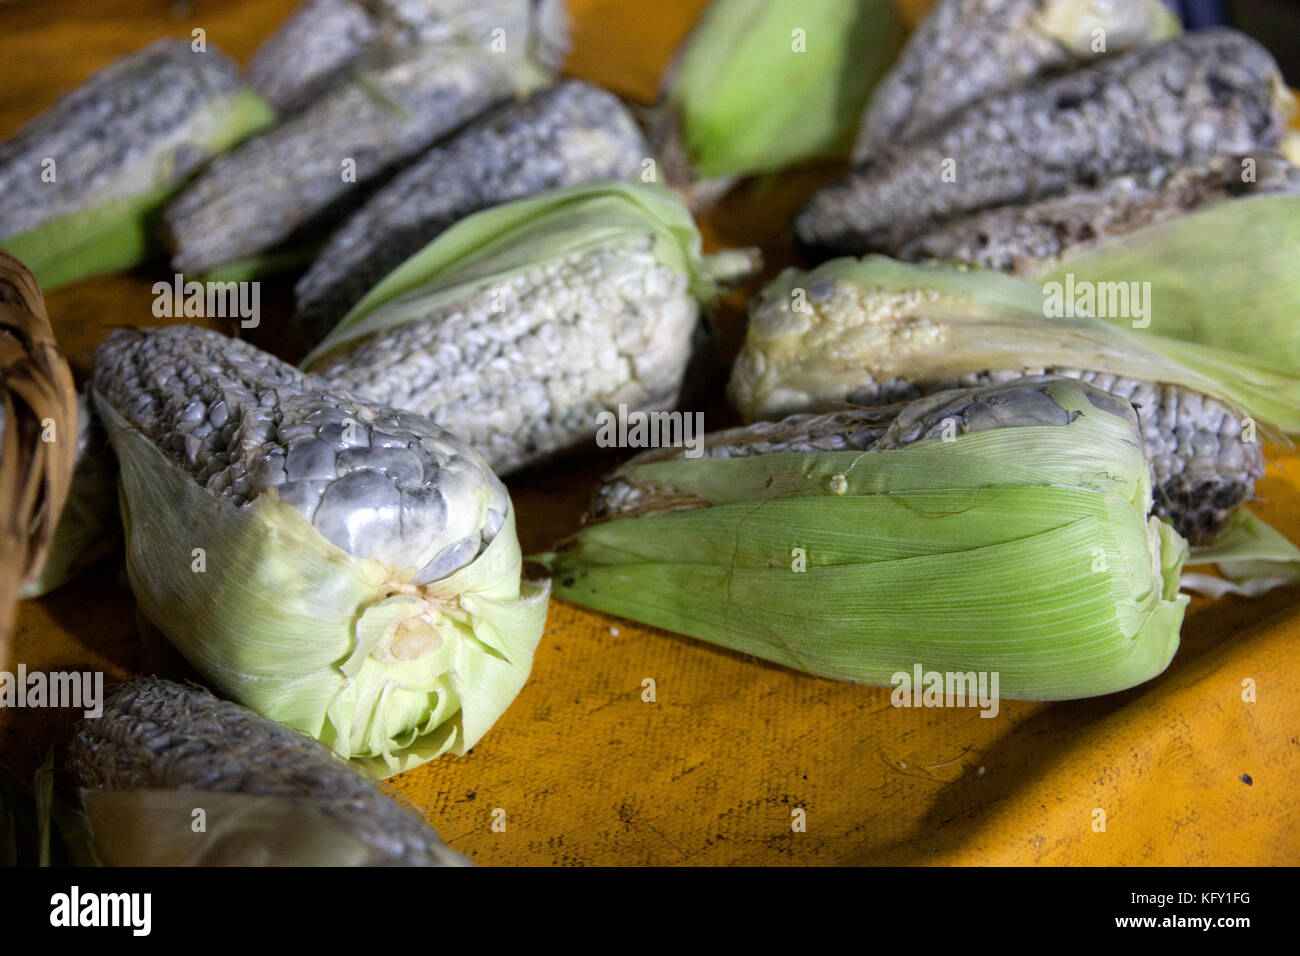 Huitlacoche, also known as corn smut, corn fungus, or Mexican truffle, is a delicacy in Mexico. Stock Photo